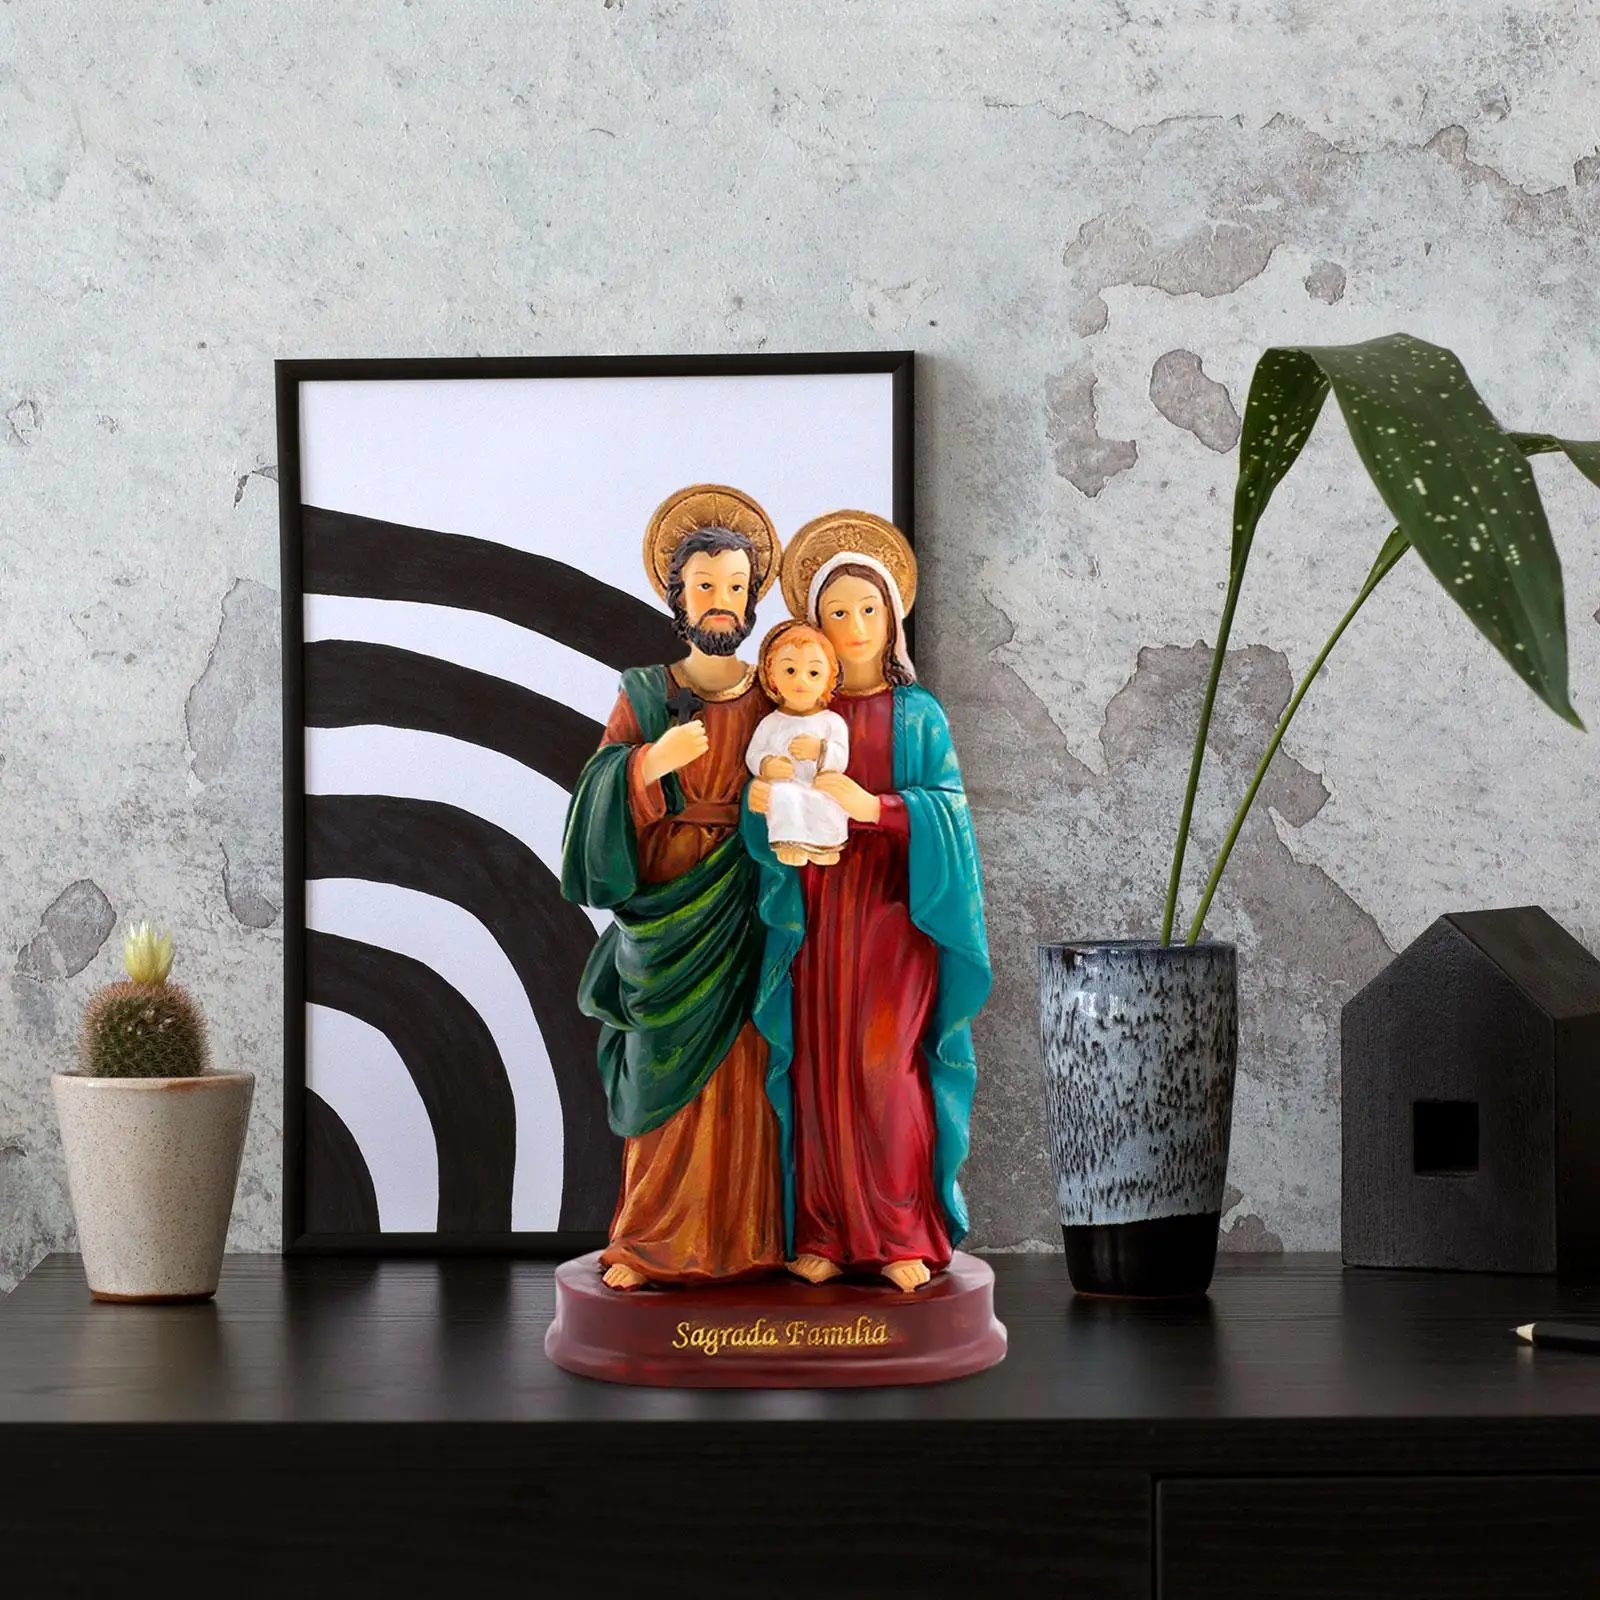 Holy Family Statue Jesus Figurine Collection Desk Craft Religious Sculpture Figures for Table Office Home Decoration Ornament